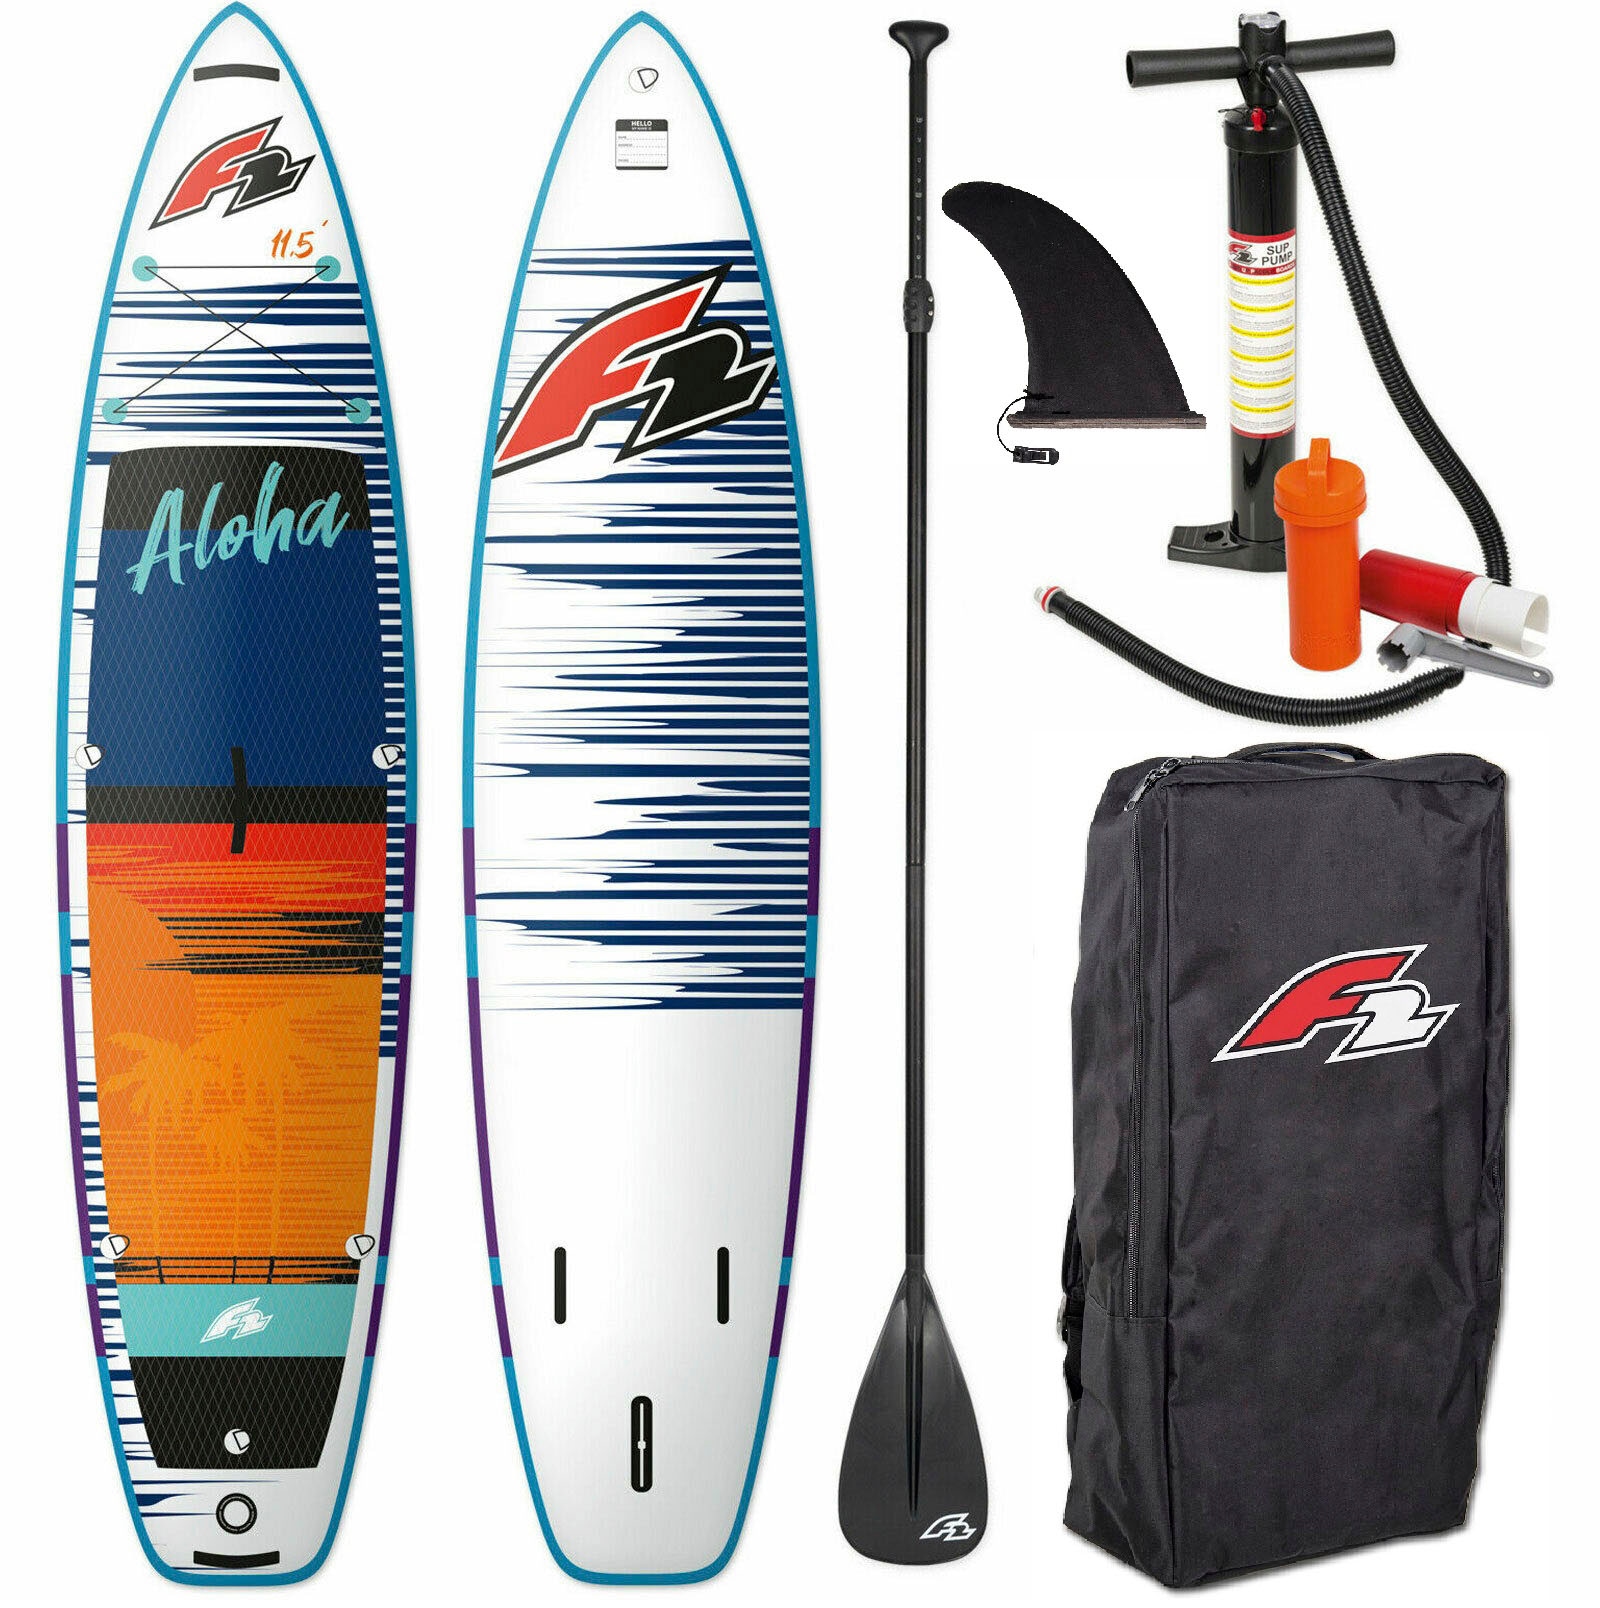 red«, Online 5 F2 SUP-Board Inflatable 11,4 tlg.) (Packung, Shop kaufen im OTTO »Aloha